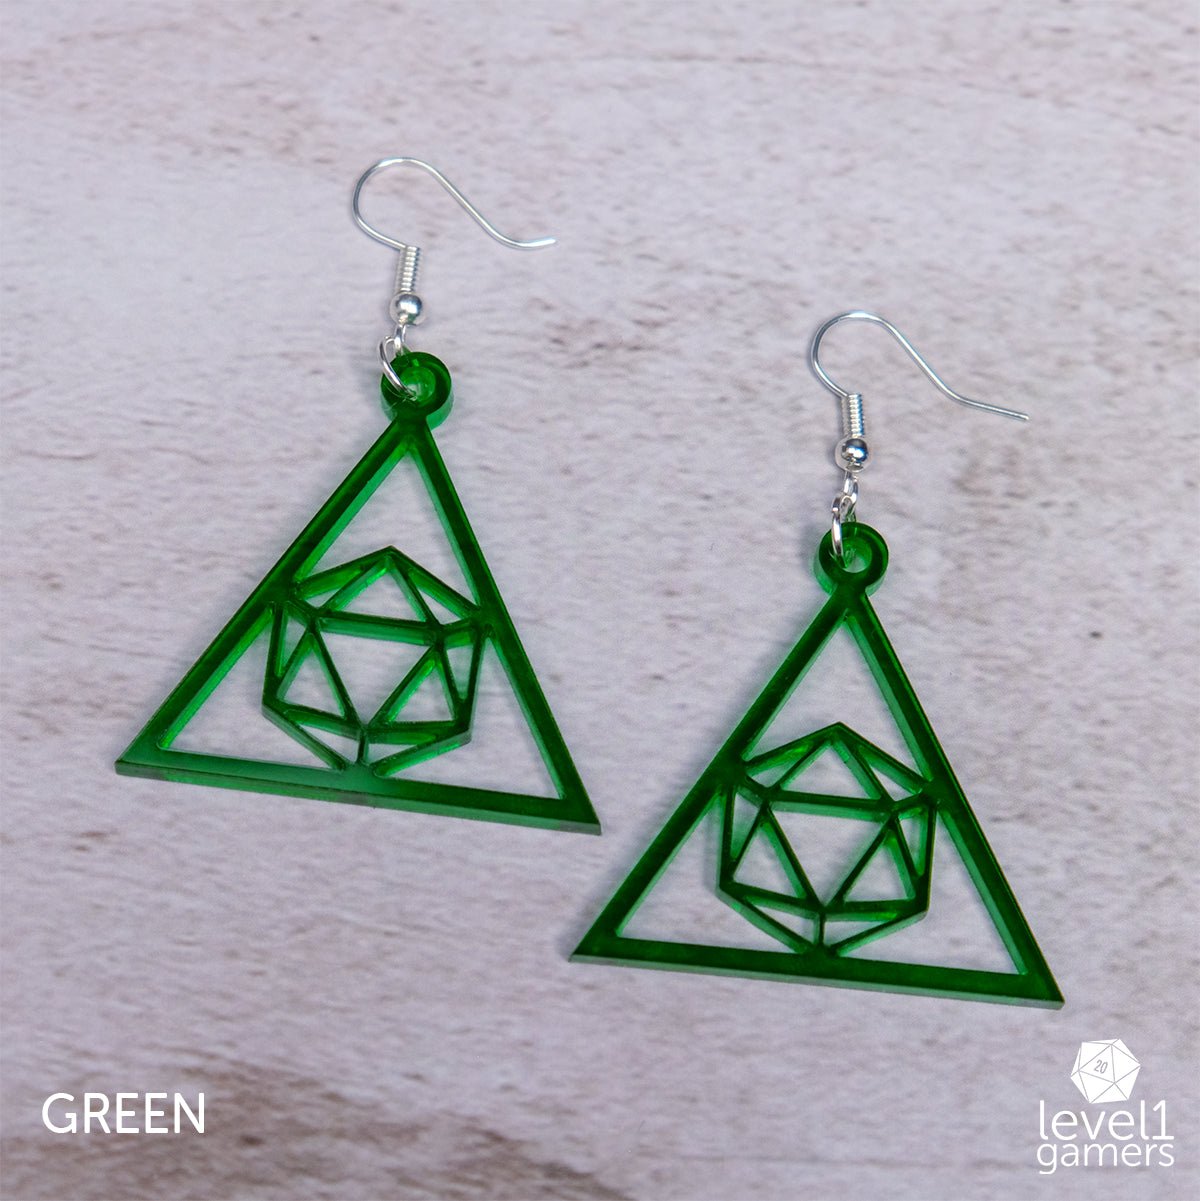 D20 Triangle Acrylic Earrings  Level 1 Gamers Pendant Green 